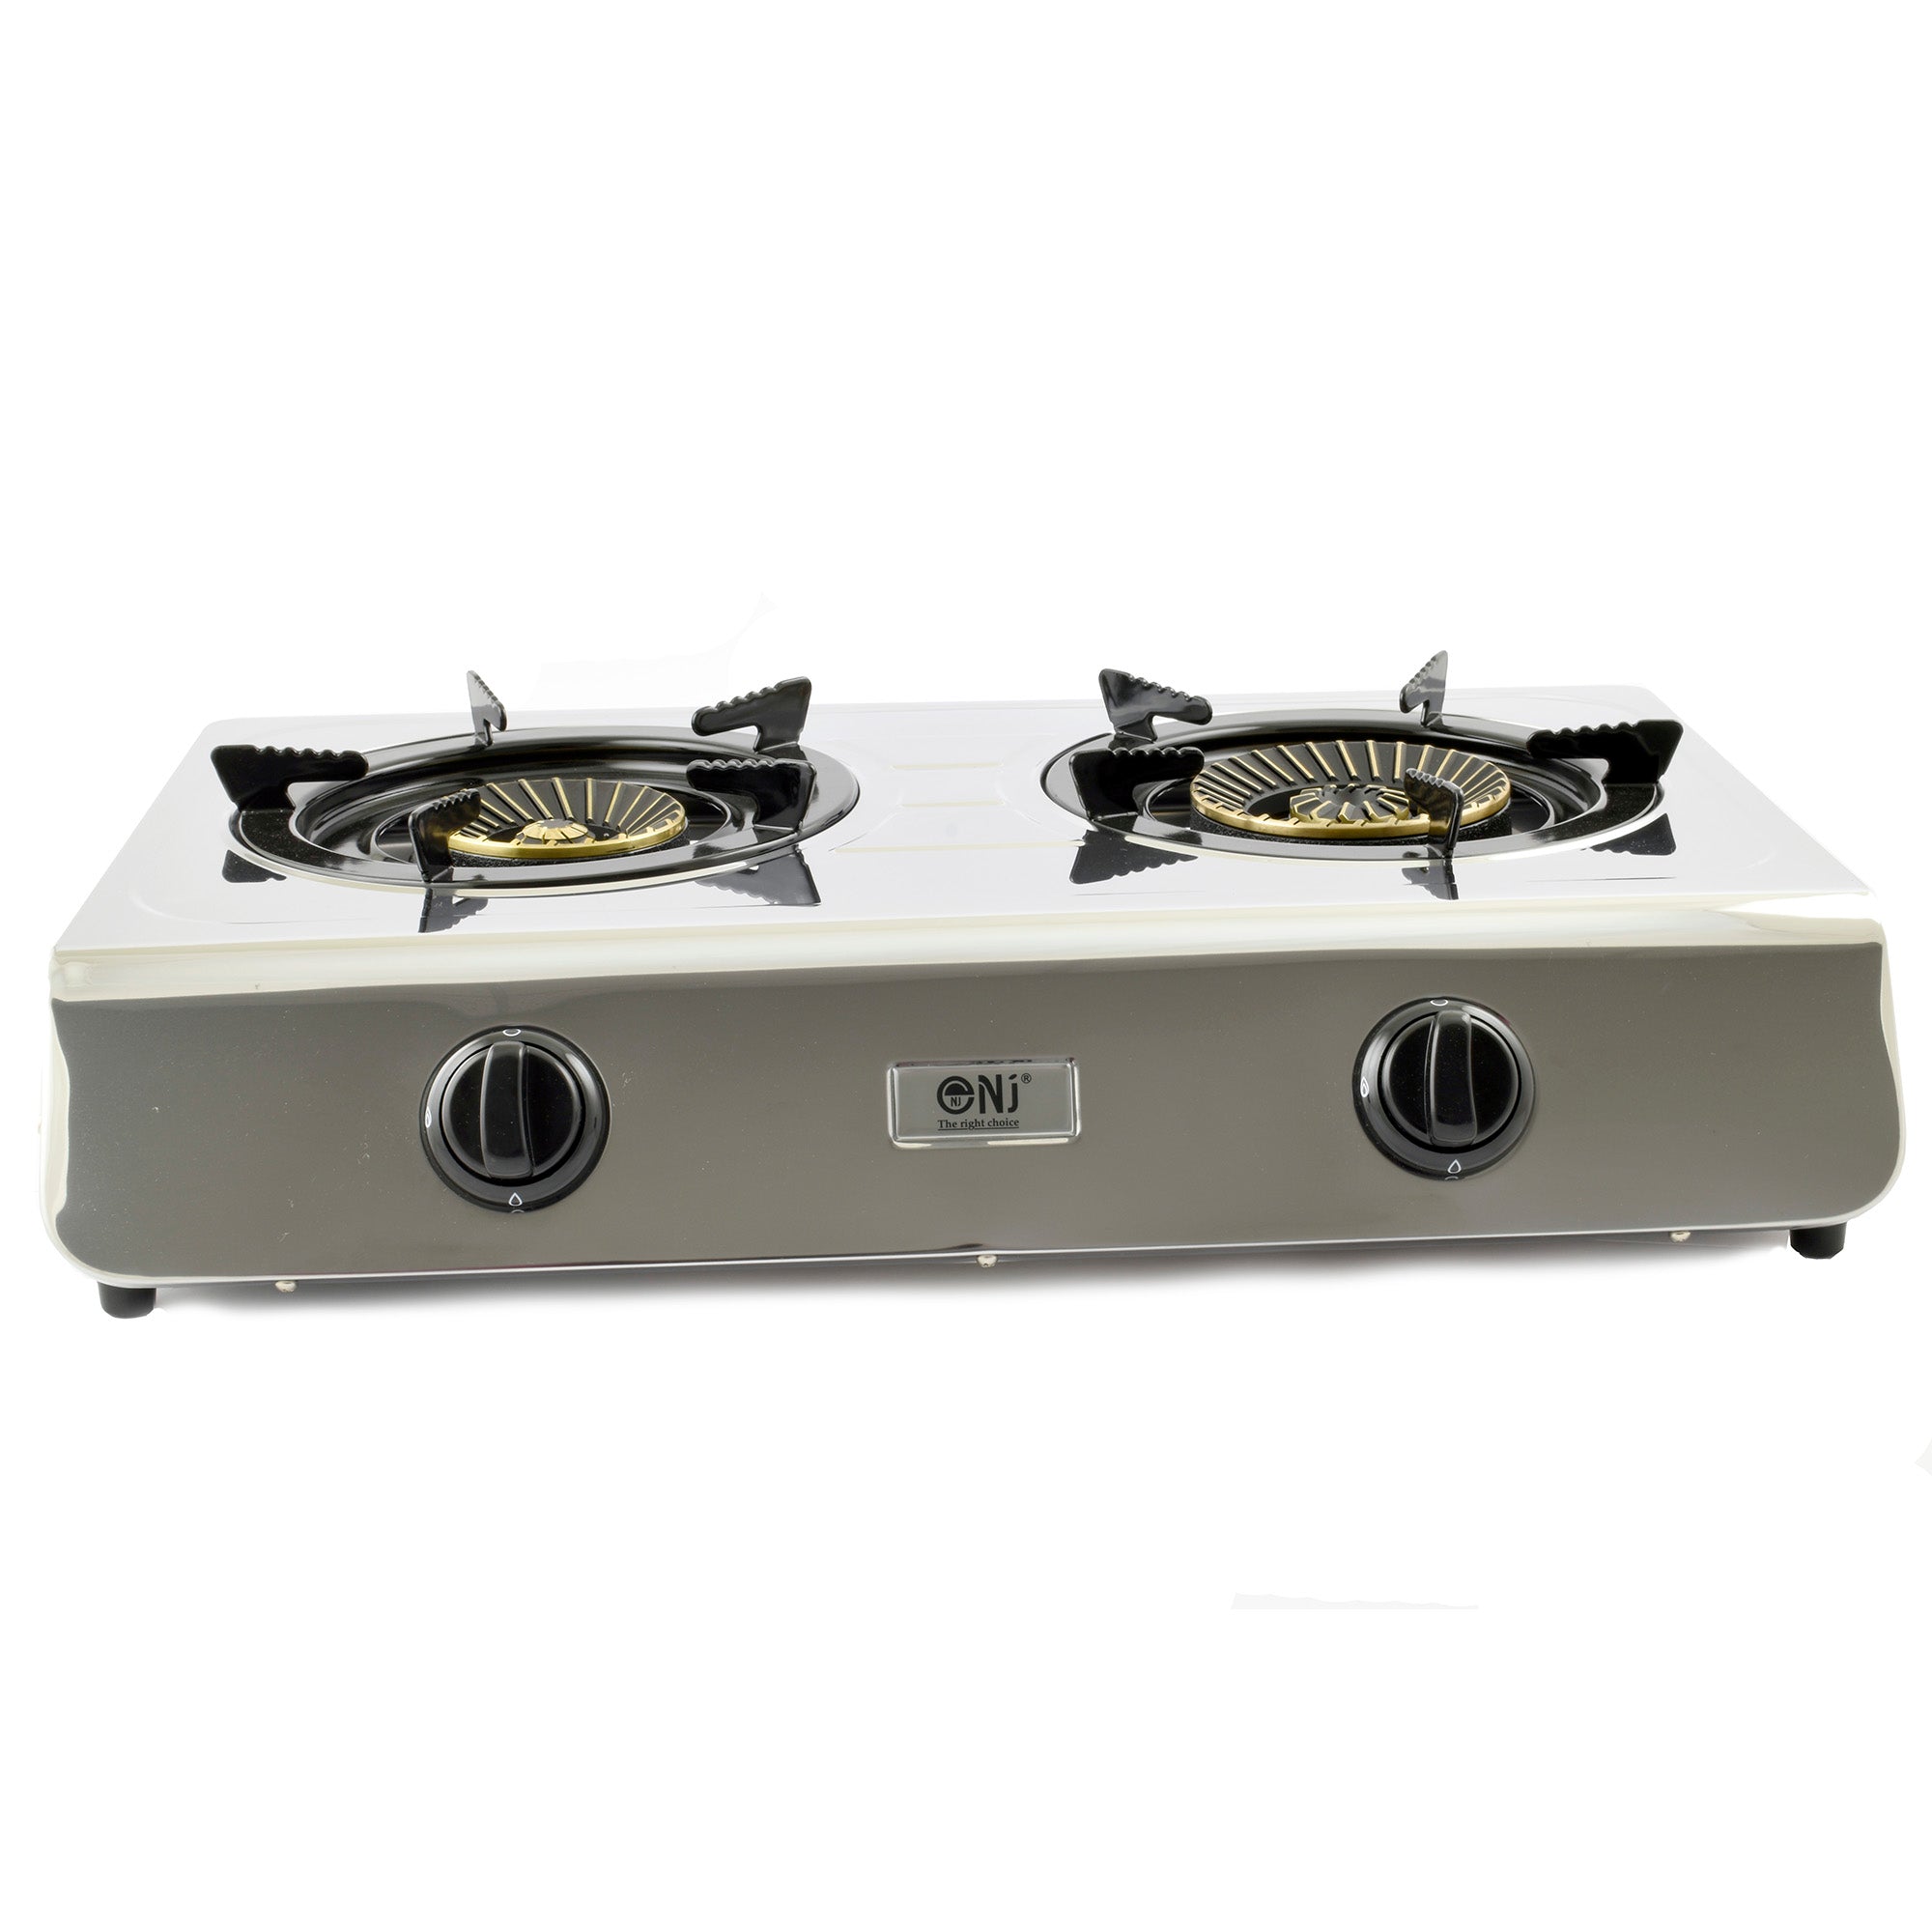 Barton 58,000 BTU Outdoor Camping Propane Double Burner Stove Cooking  Station with Drop-Down Side Tables 95537-H - The Home Depot